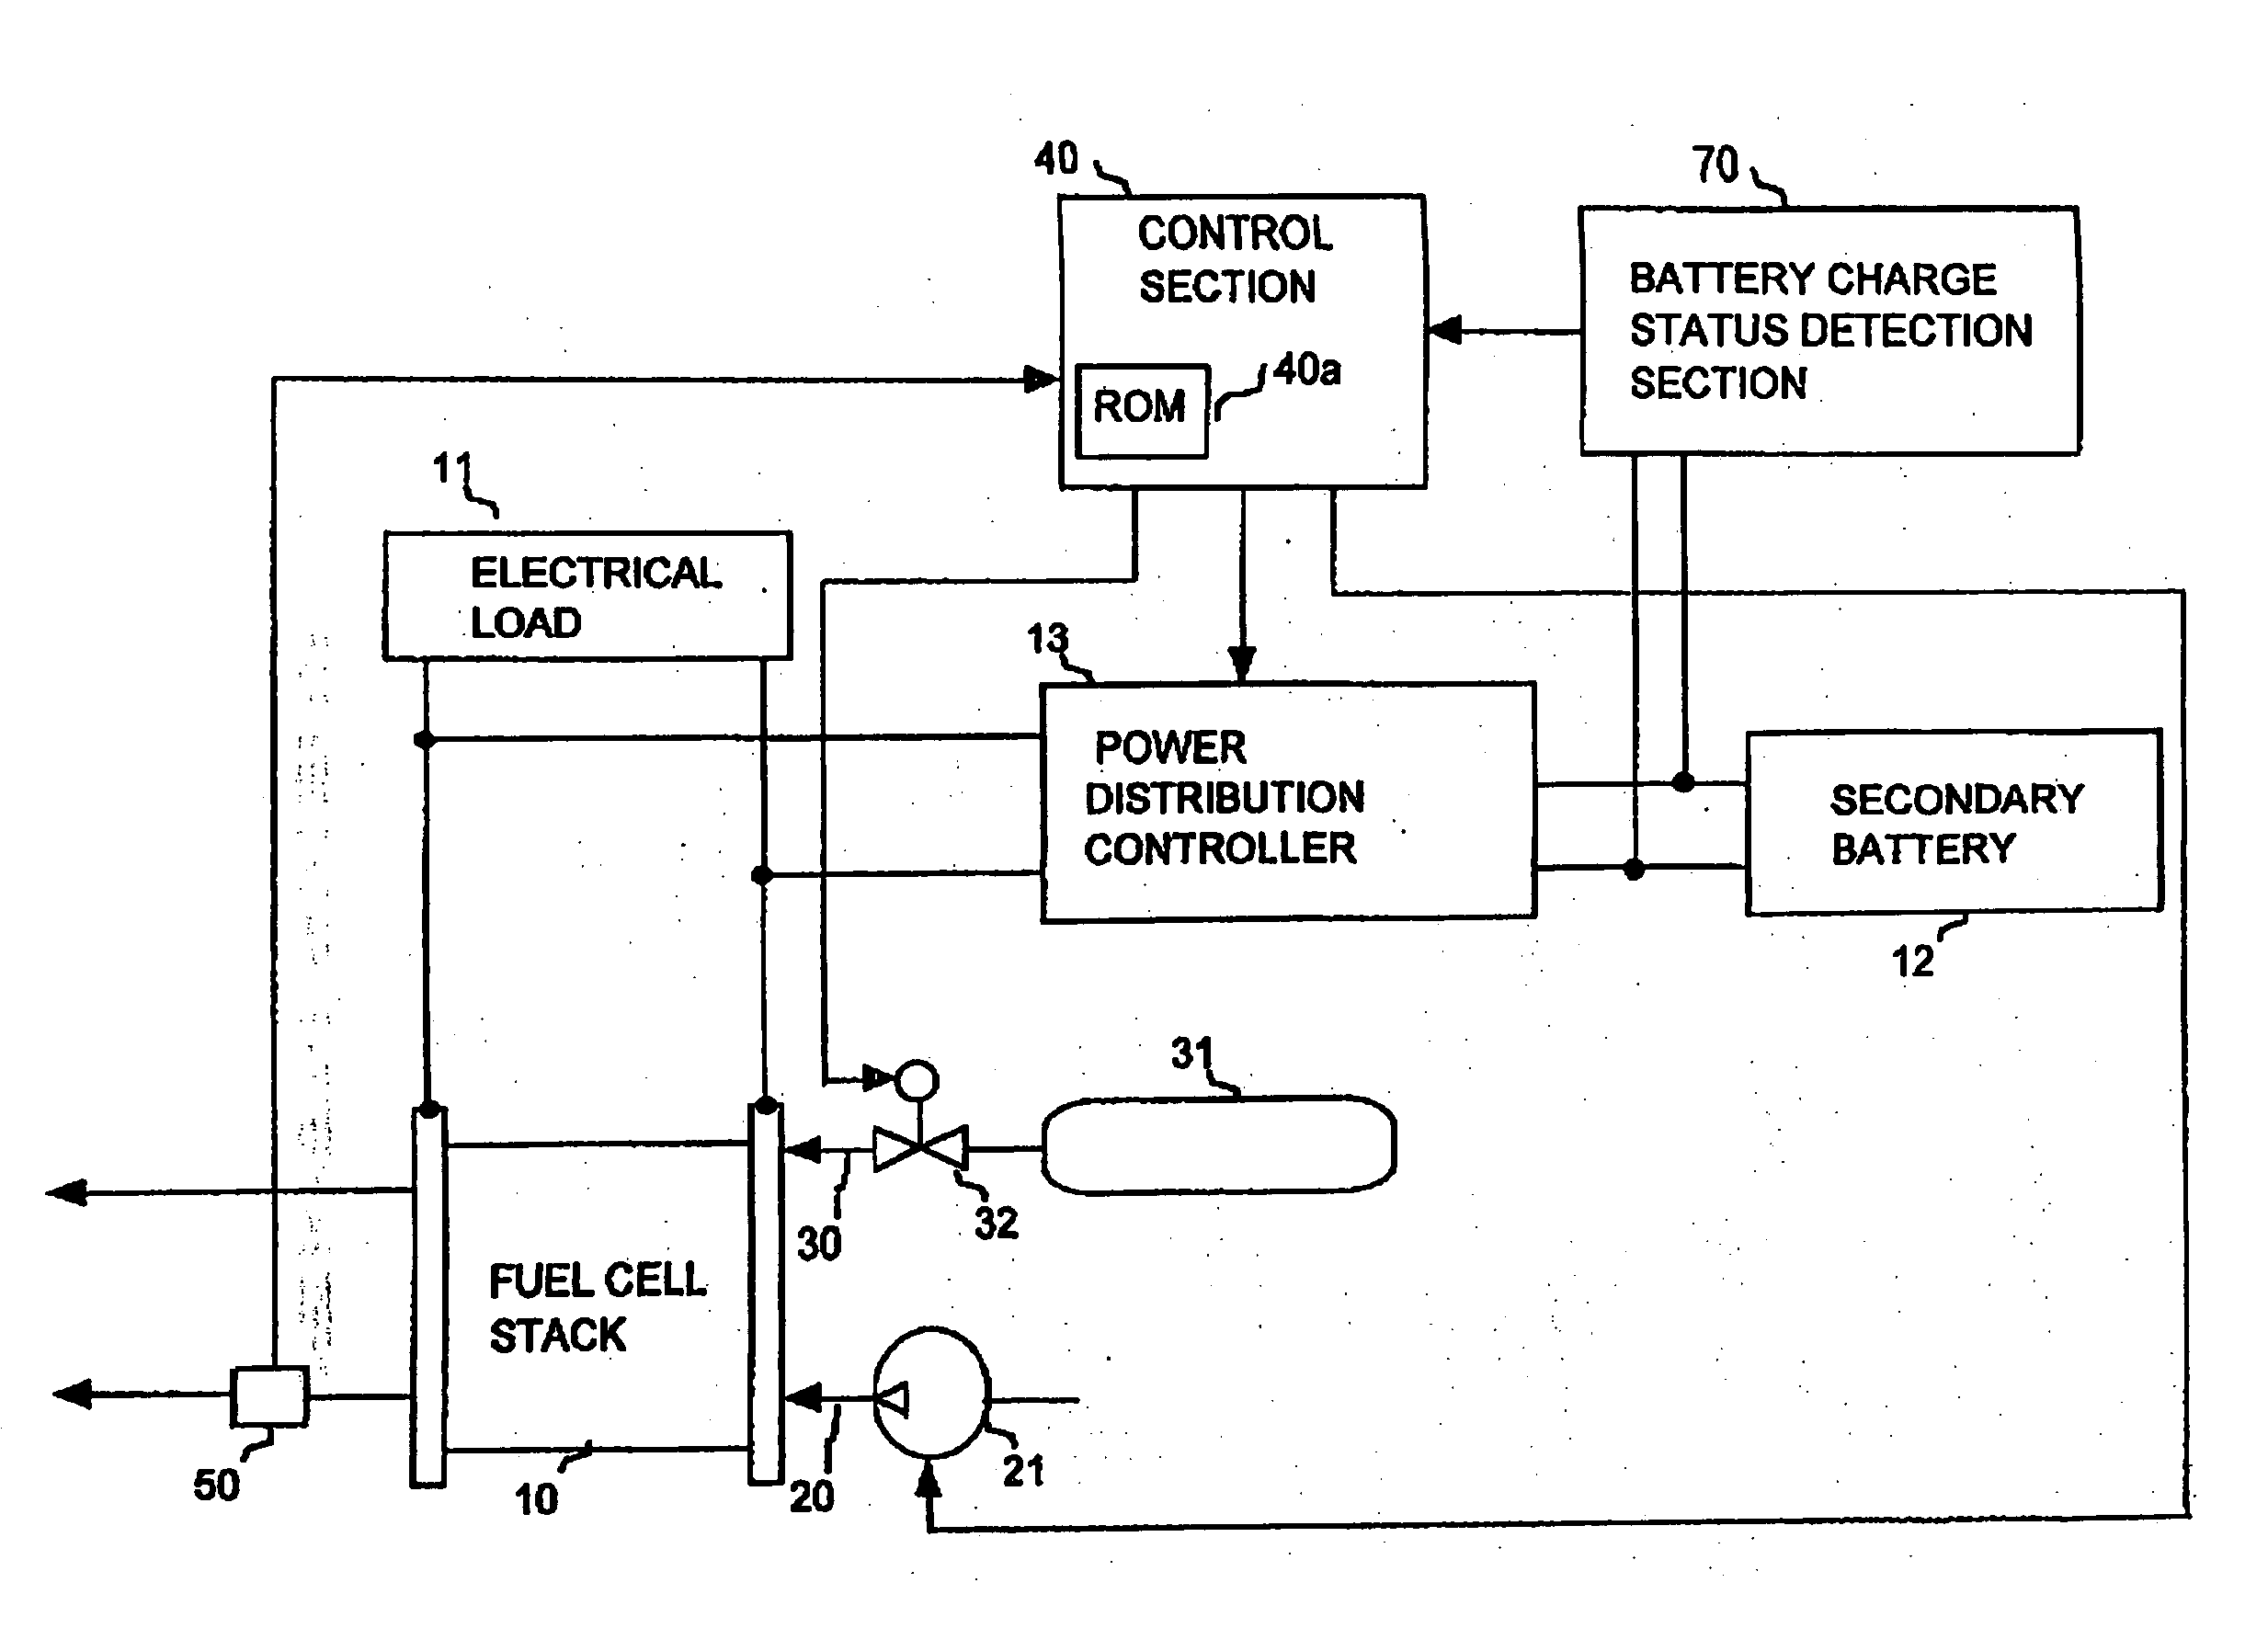 Fuel cell system utilizing control of operating current to adjust moisture content within fuel cell